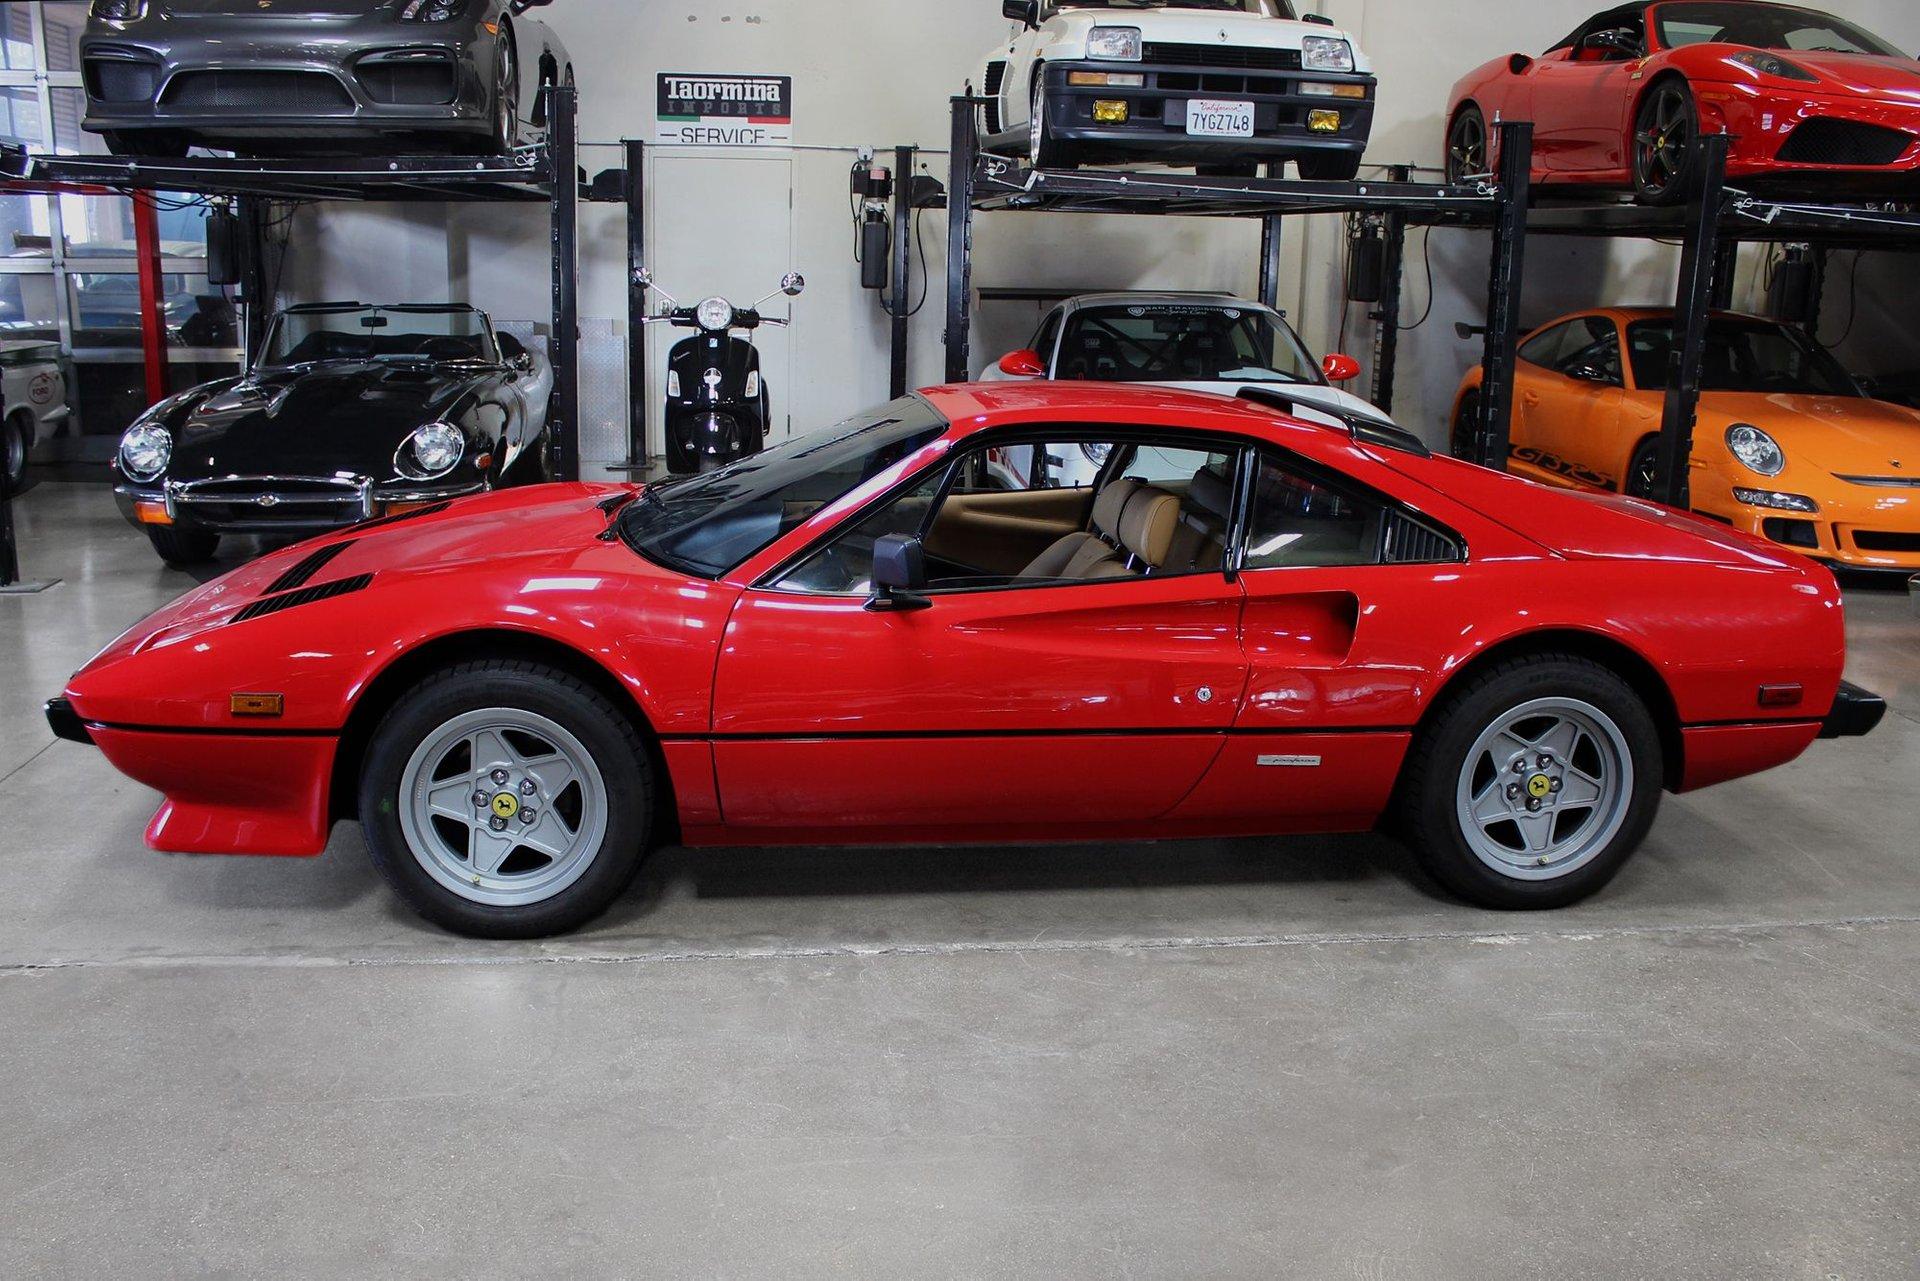 Used 1985 Ferrari 308 Gtb For Sale Special Pricing San Francisco Sports Cars Stock P19109